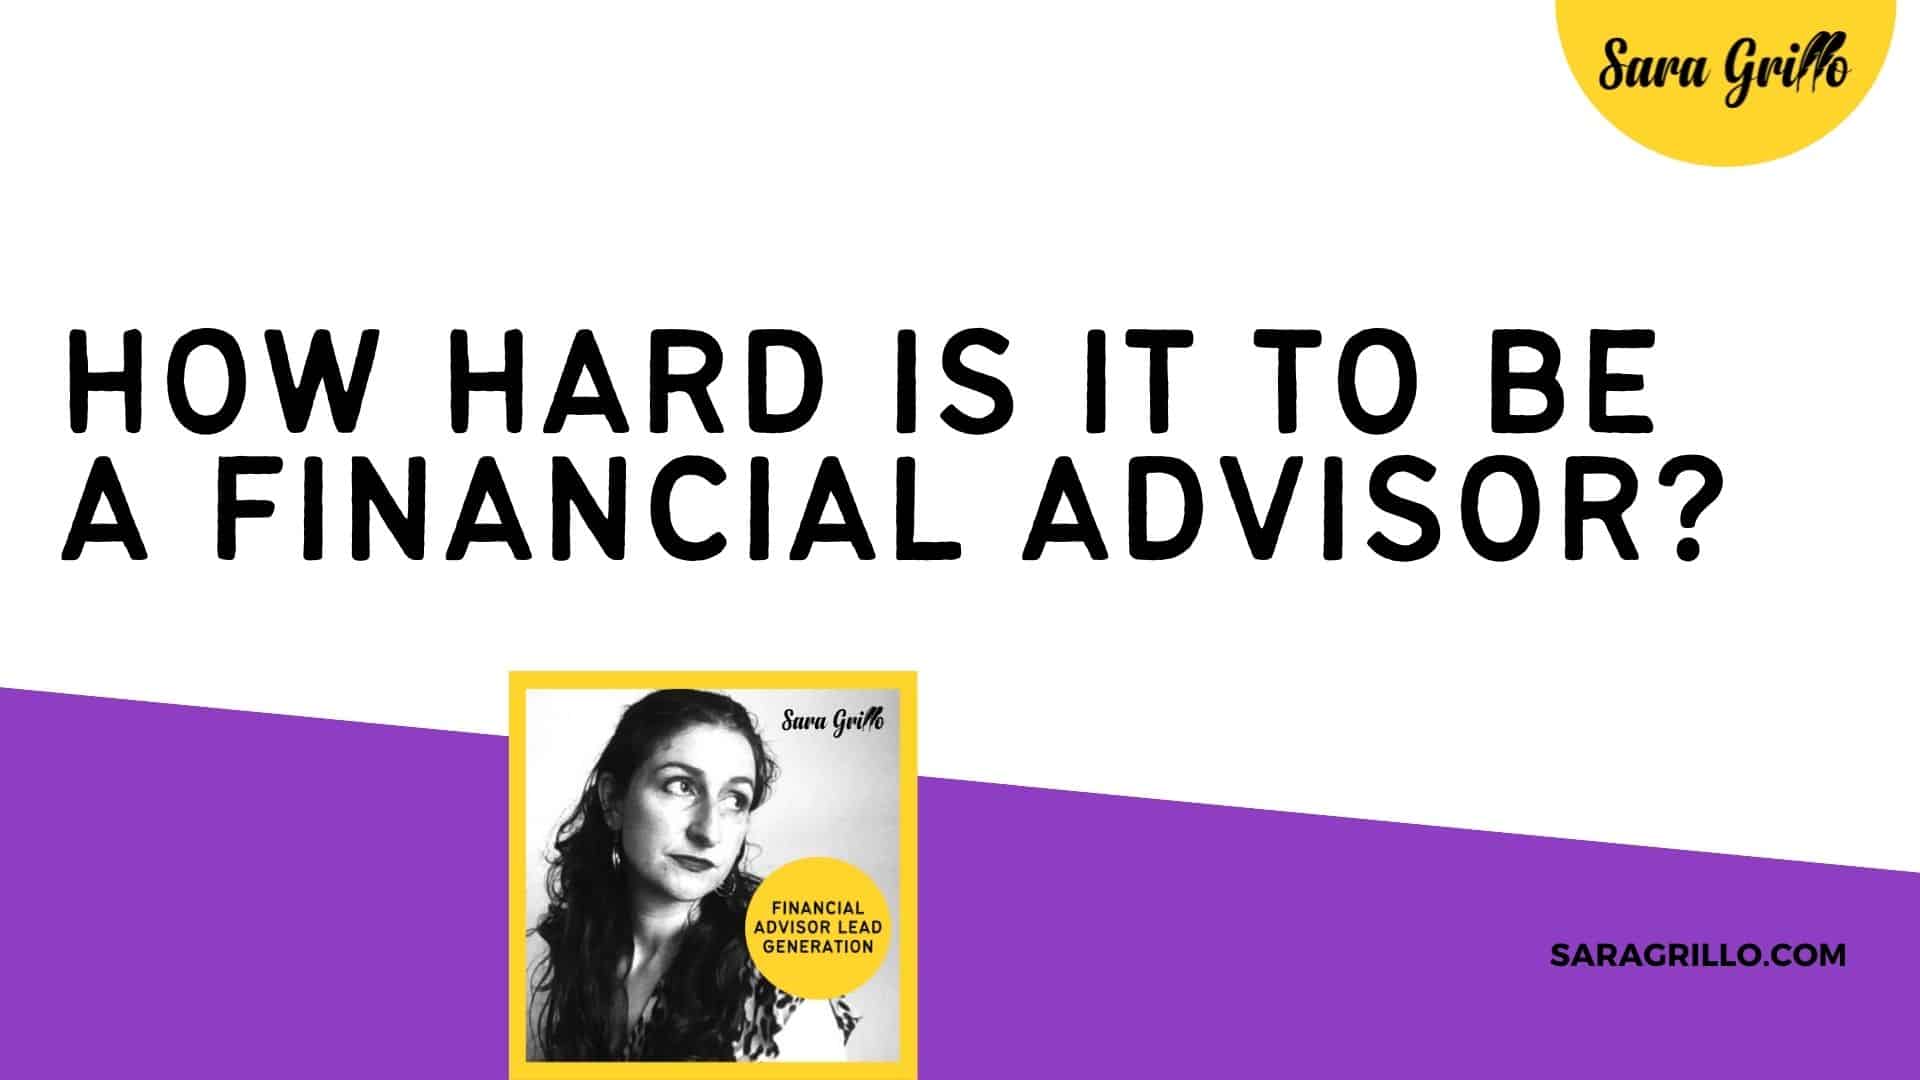 How hard is it to be a financial advisor? In this blog we'll discuss the five difficulties financial advisors tend to face.